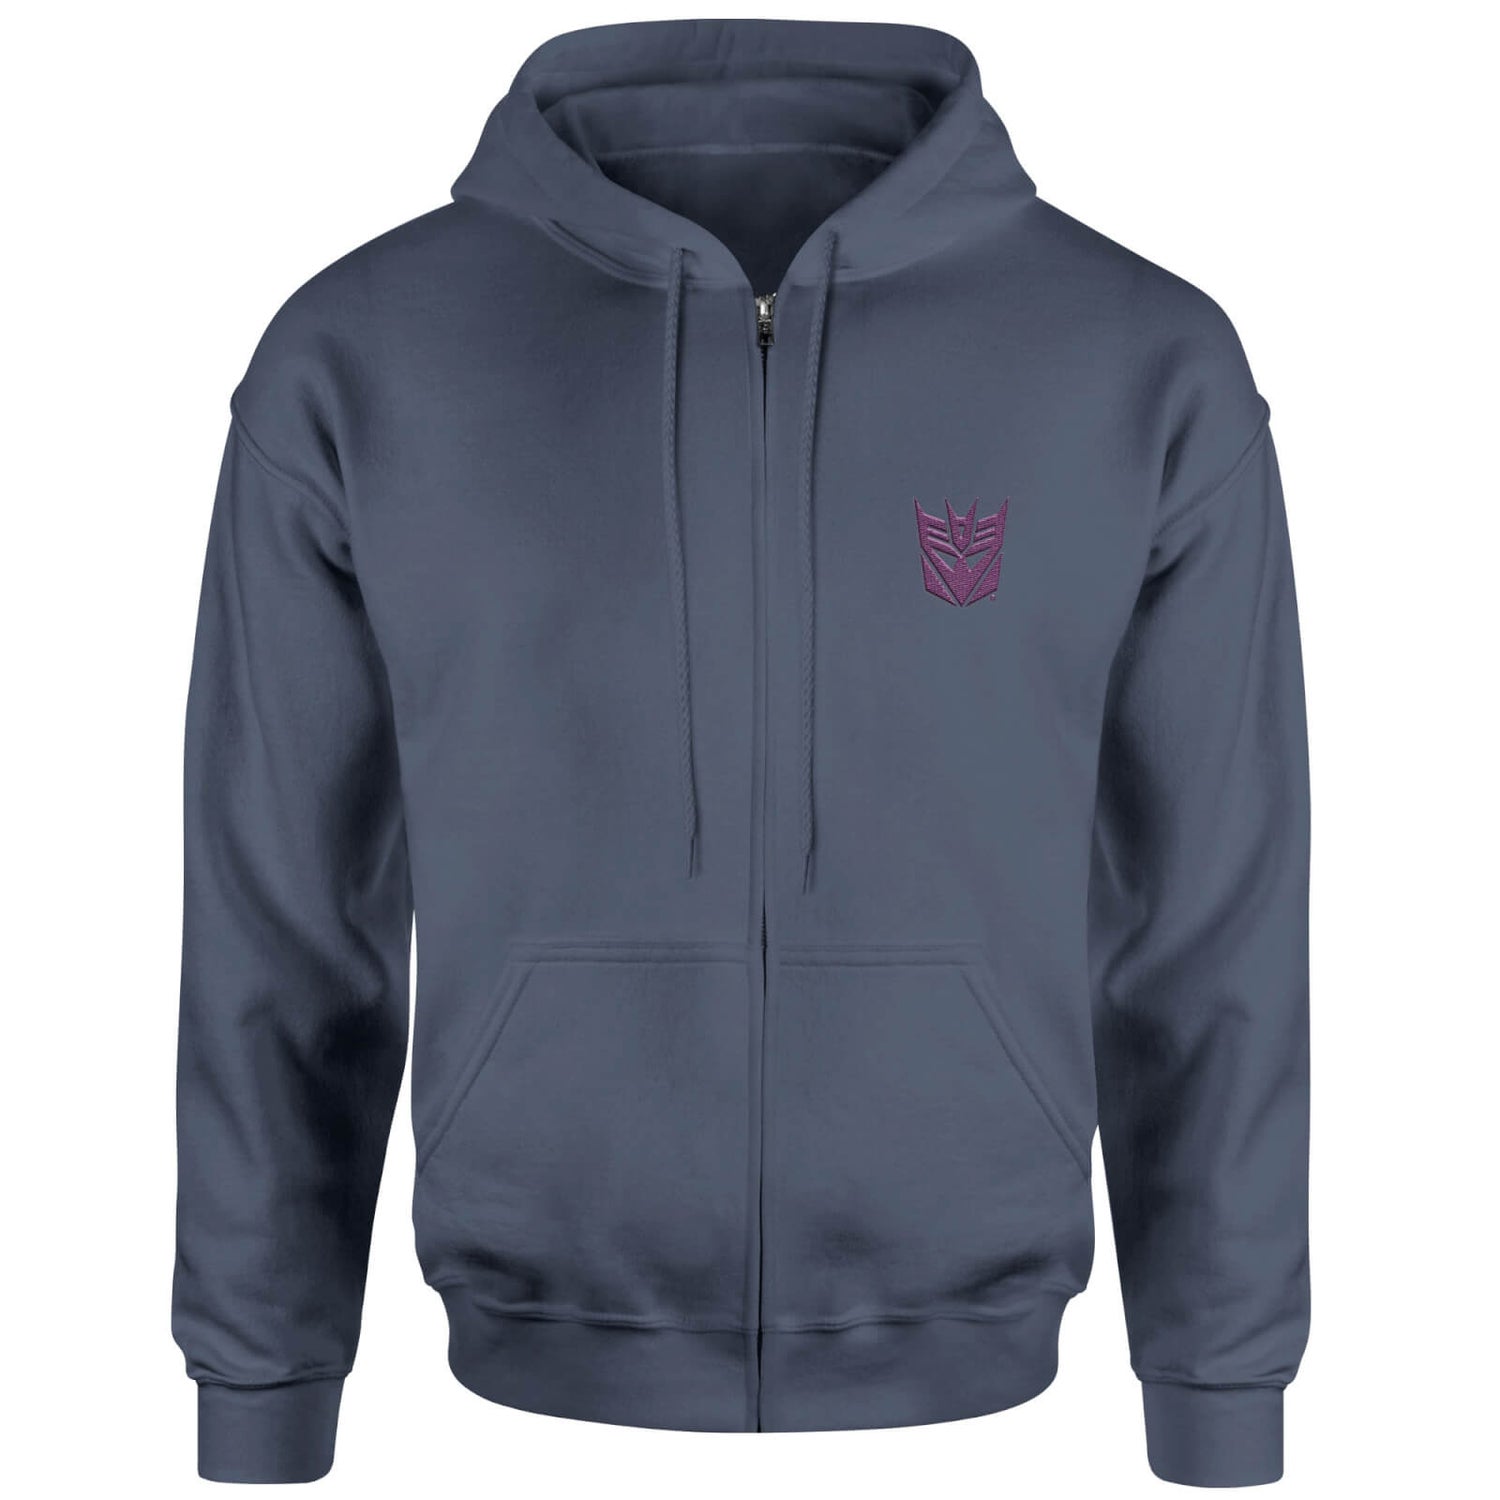 Transformers Decepticon Embroidered Unisex Zipped Hoodie - Navy